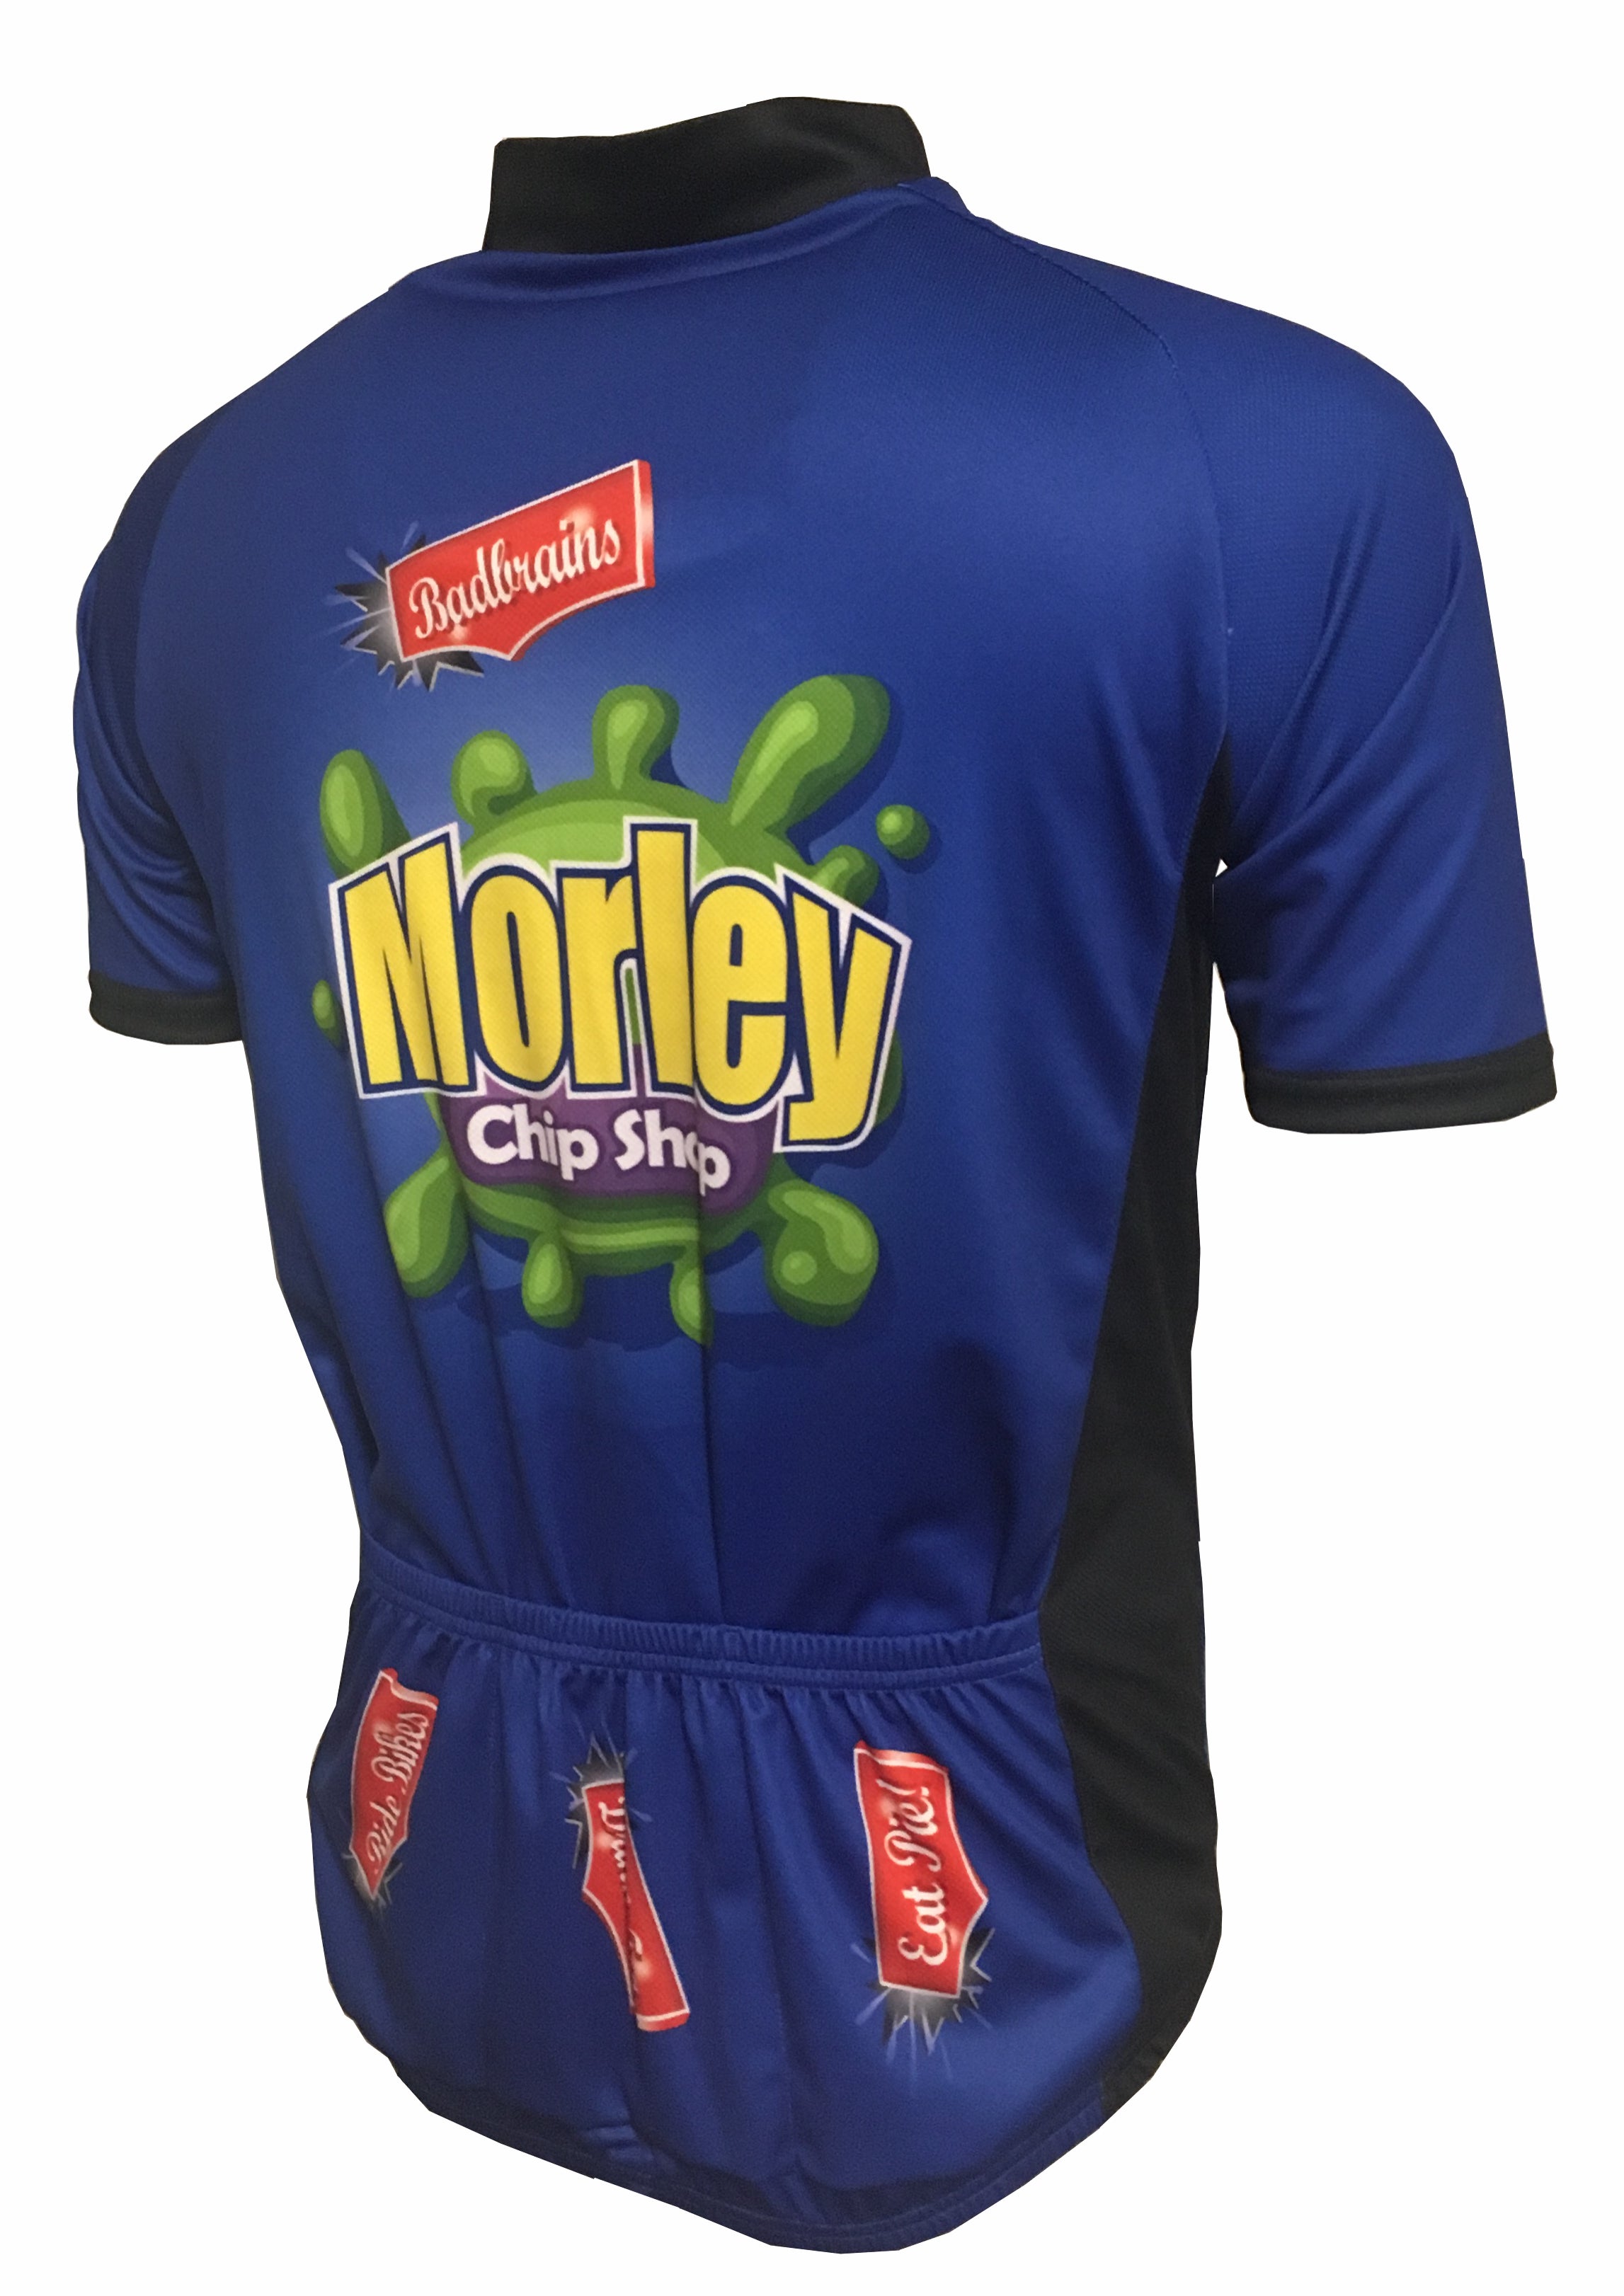 Morley Chip Shop Kids Road Cycle Jersey Back